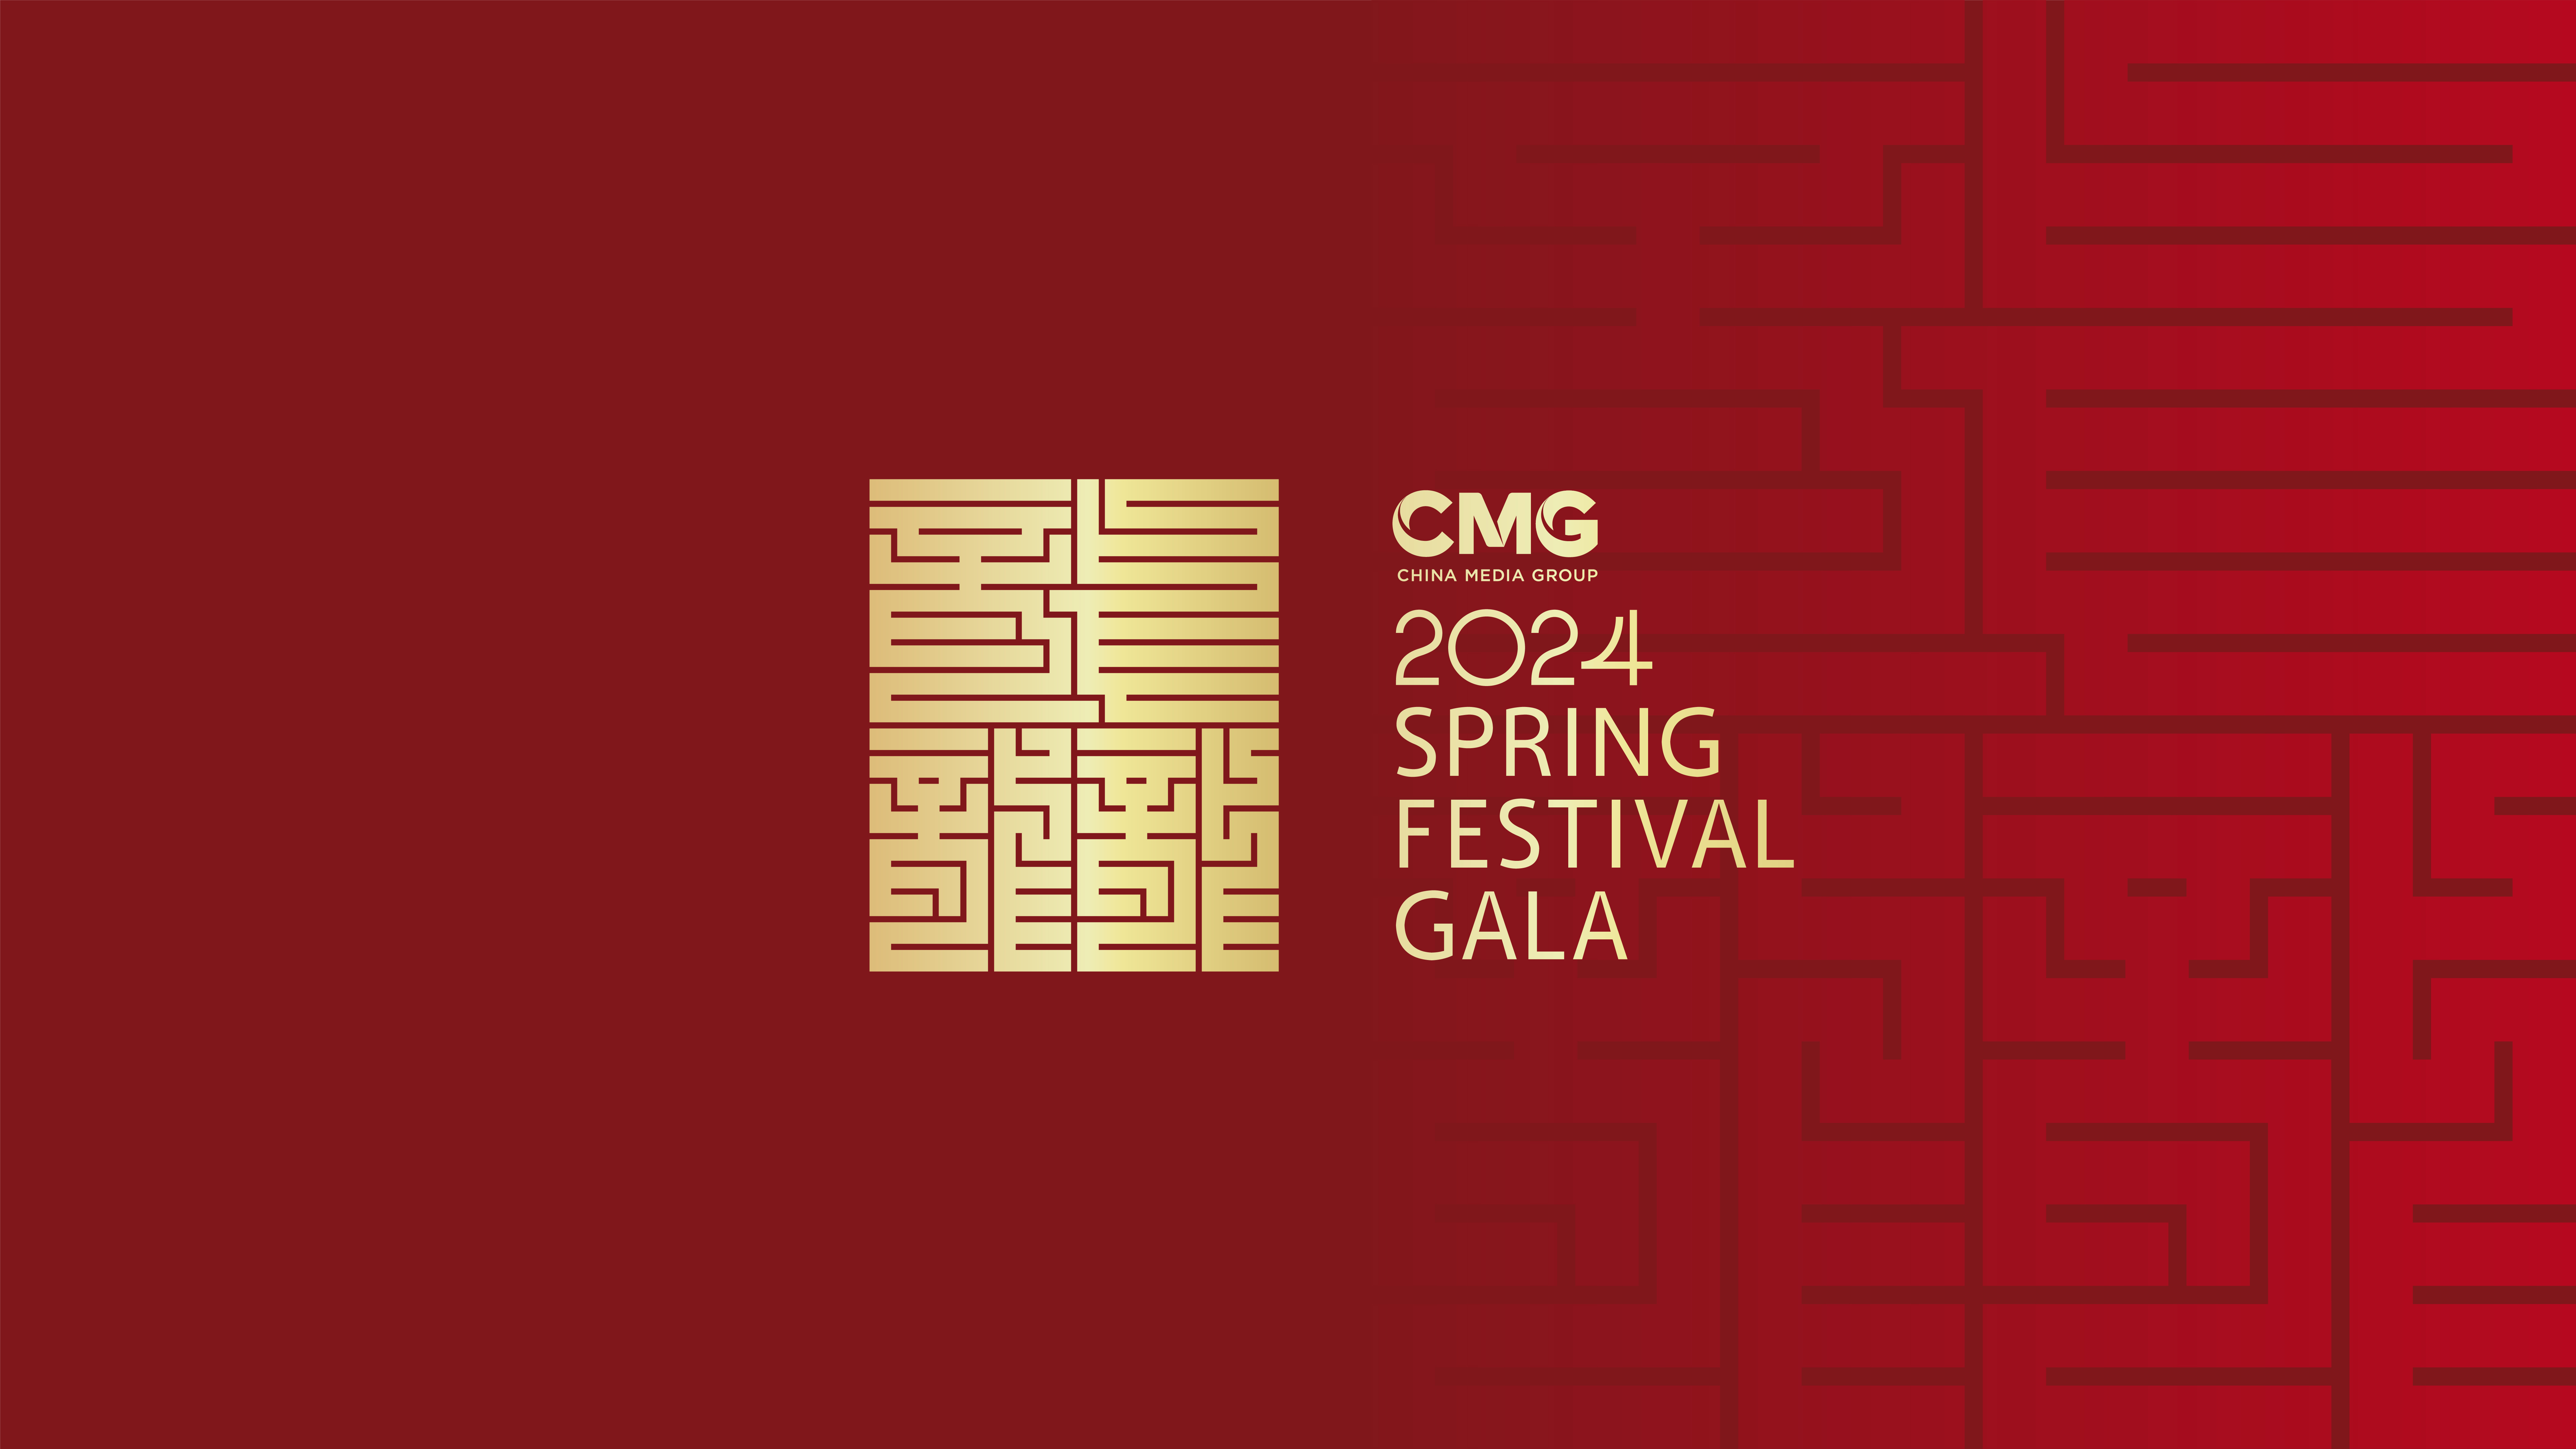 The logo for the 2024 Spring Festival Gala. /CMG